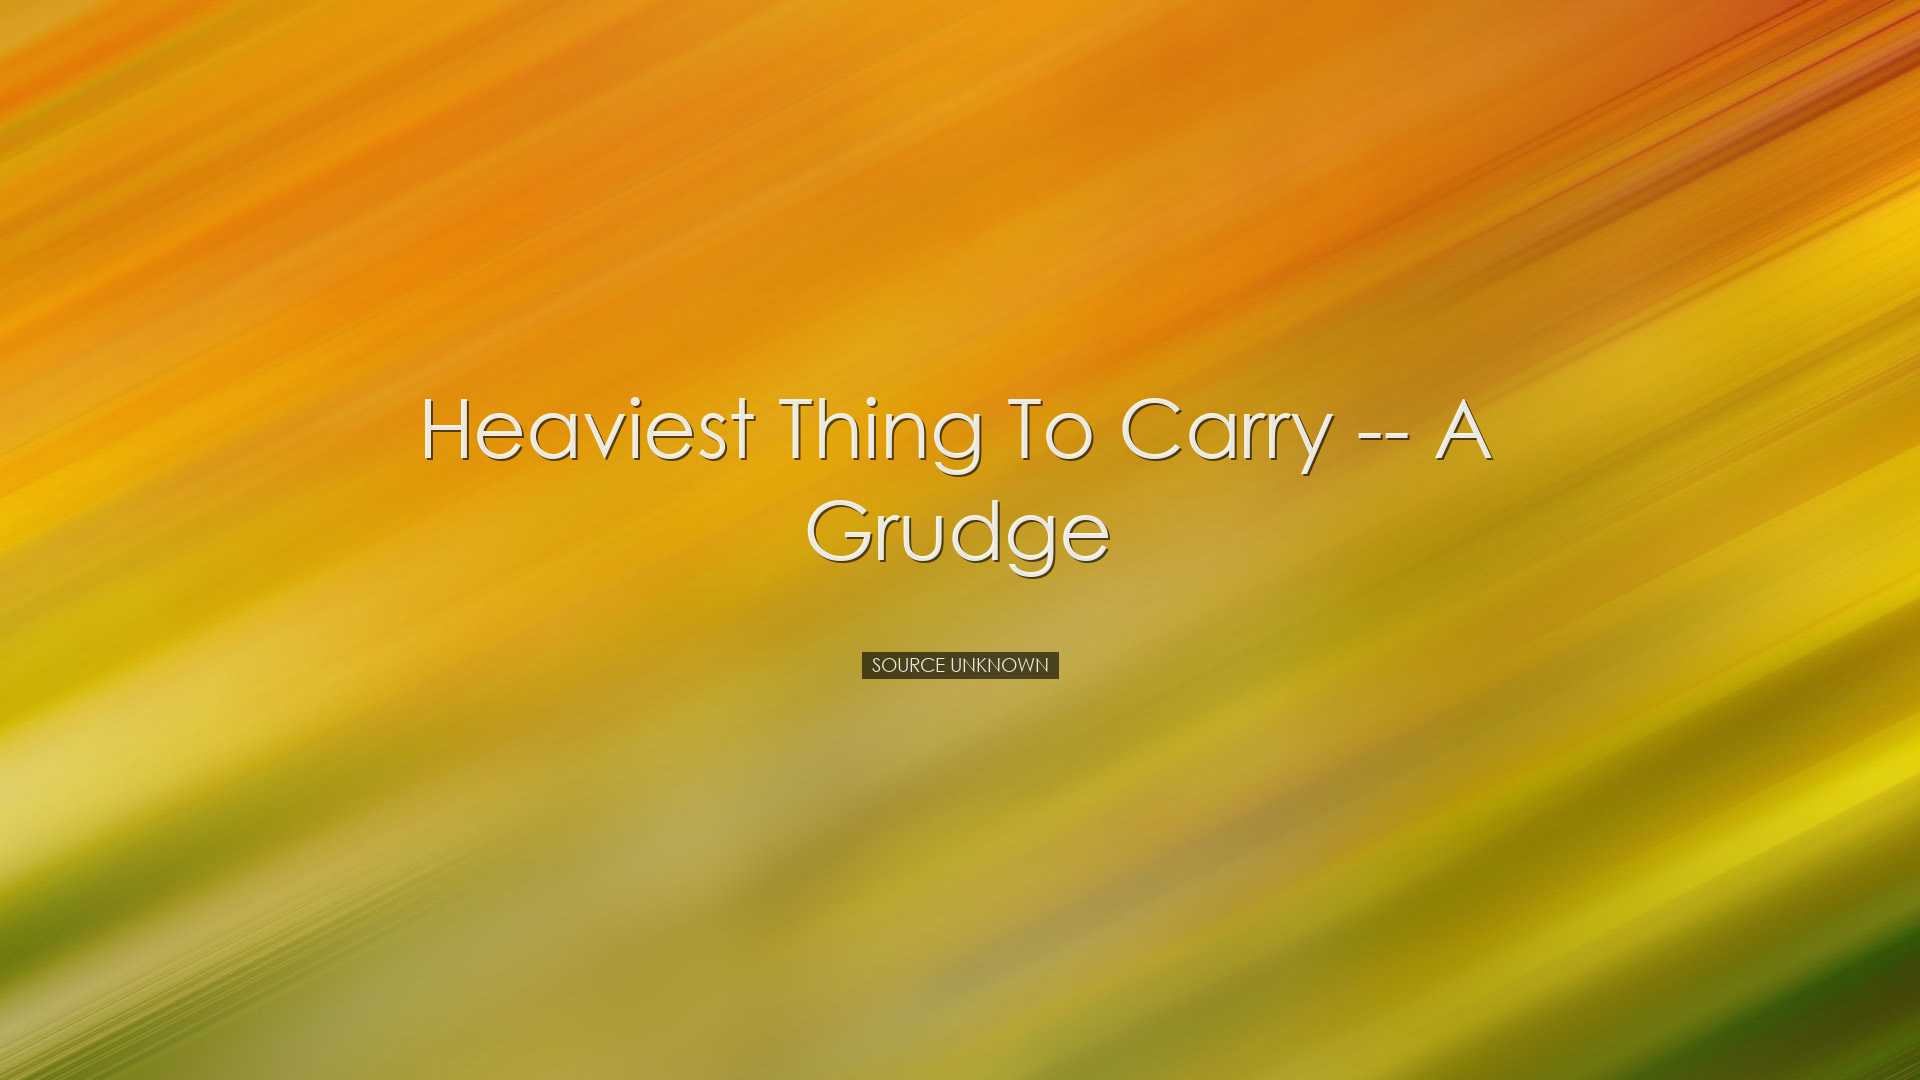 Heaviest thing to carry -- a grudge - Source Unknown